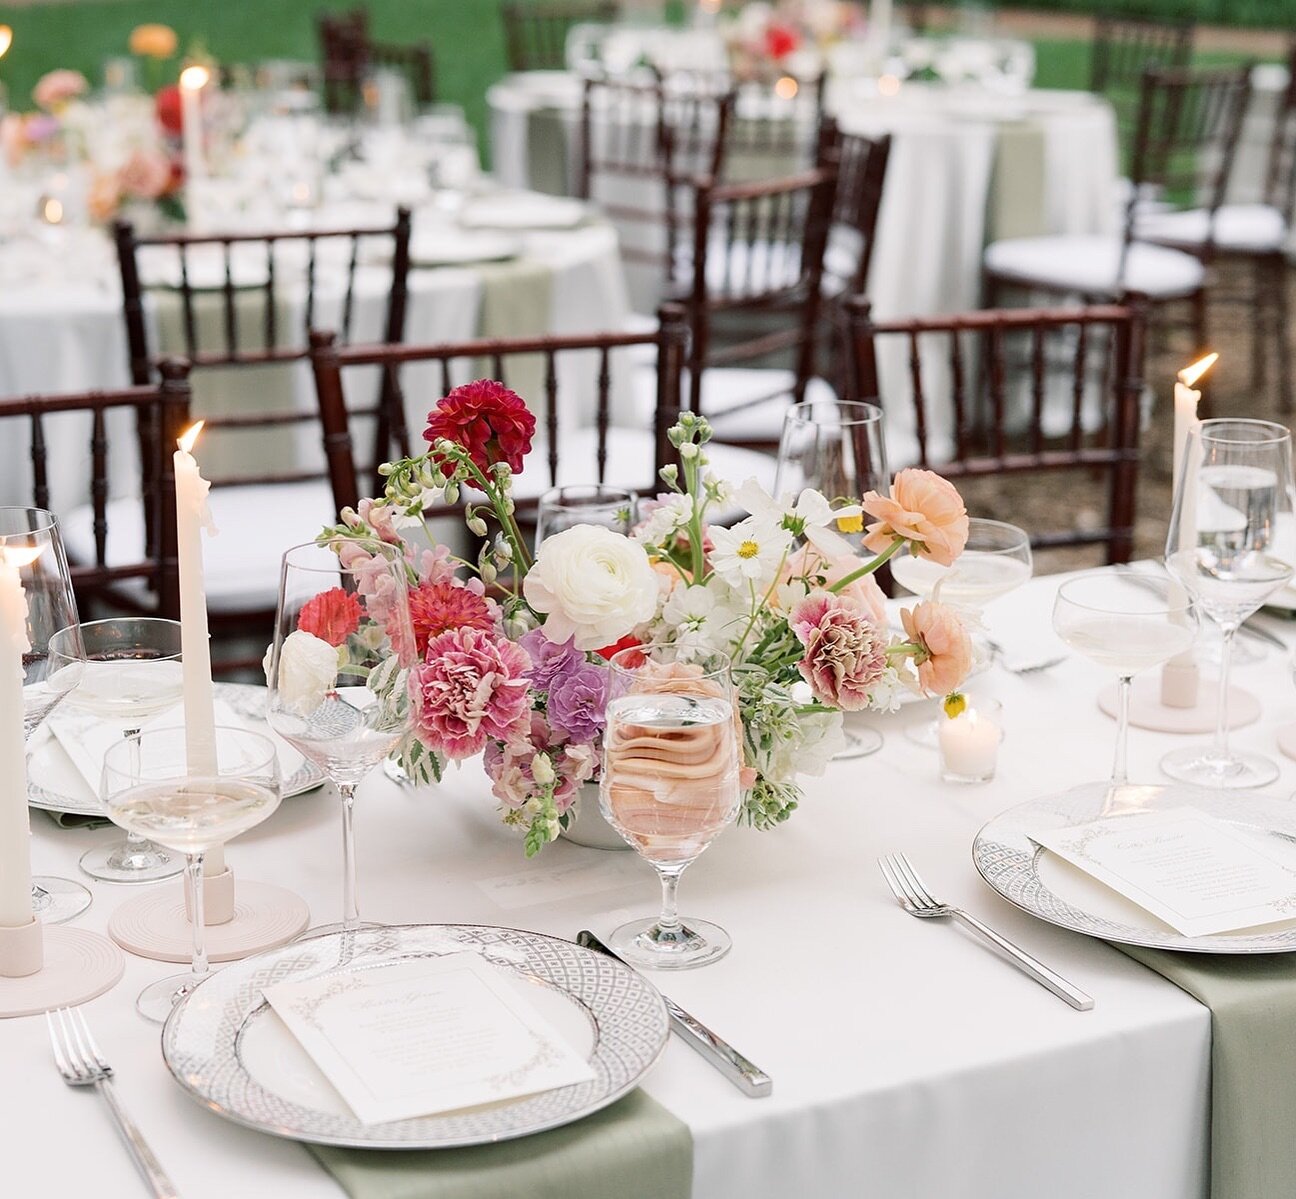 🤍

Planning &amp; Event Design: @jessicaalexanderevents
Photography: @daniellehutchinsonphotography
Videography: @bonarrigofilms
Venue: @heightshouseevents
Floral Design: @moodfleuriste
Catering: @snappeanc
Stationery: @ivyandlinendesign
Rentals: @a